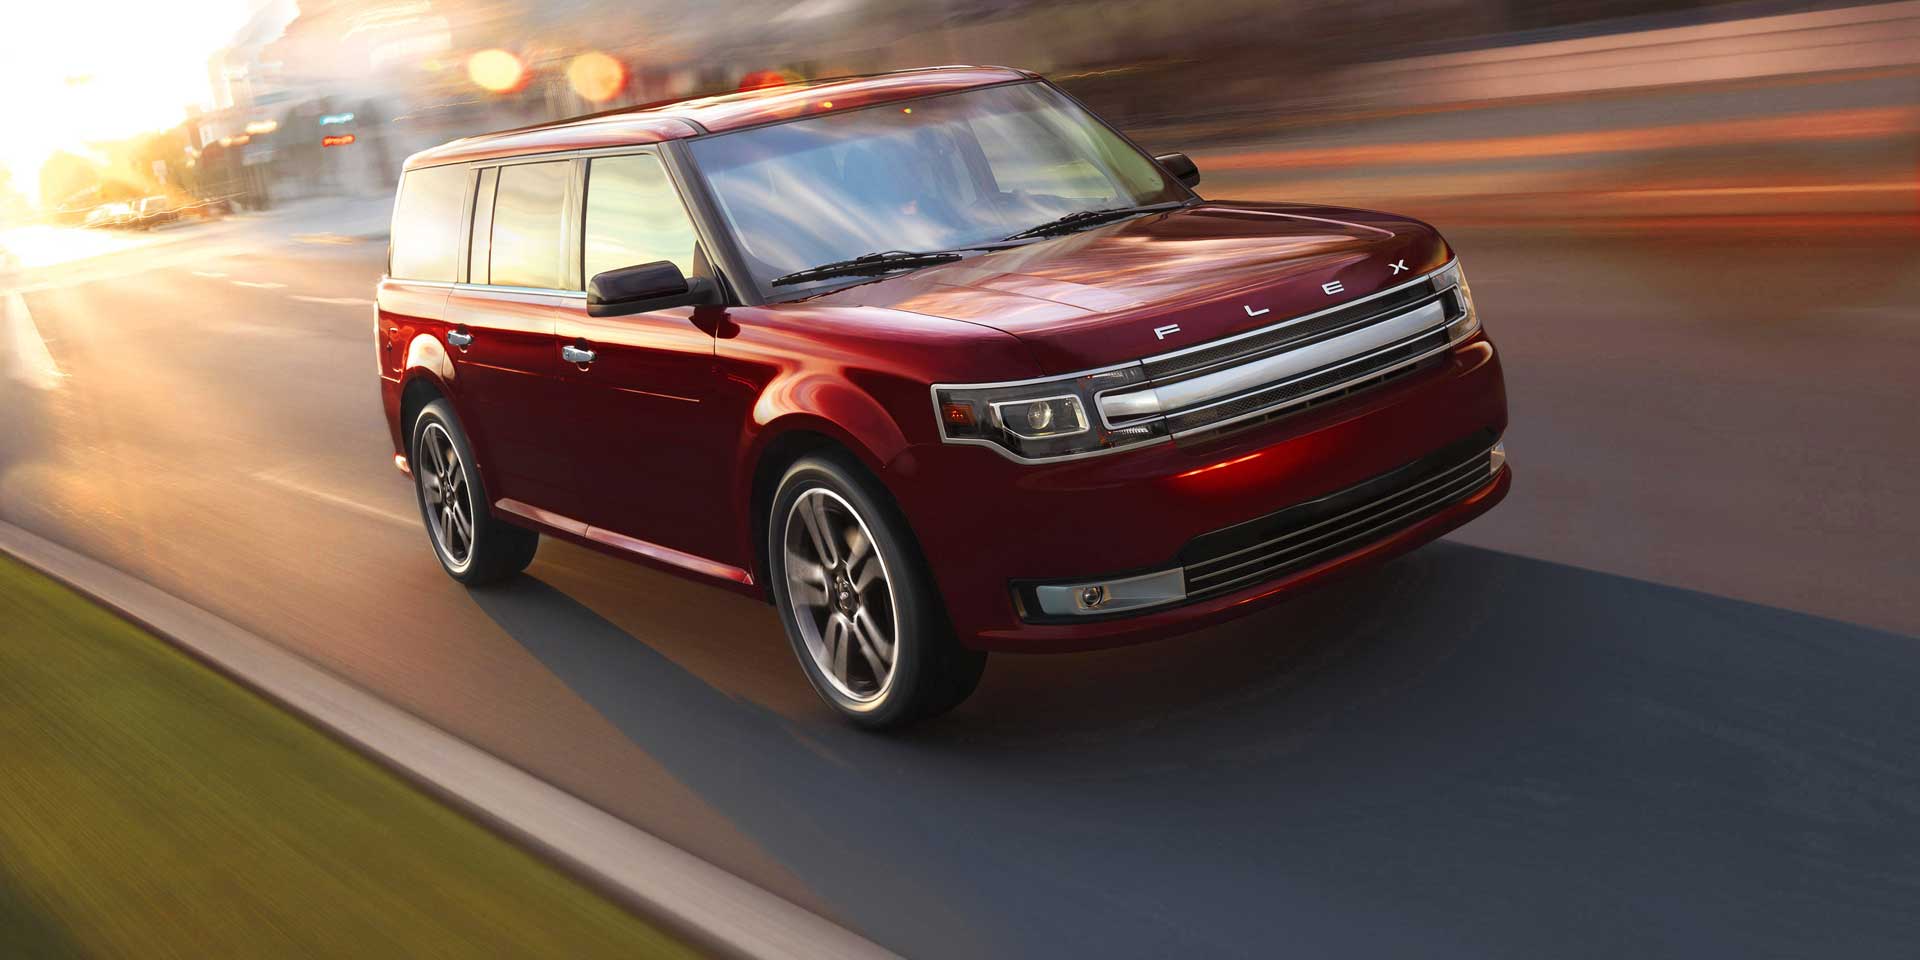 Rent a ford flex in chicago #7